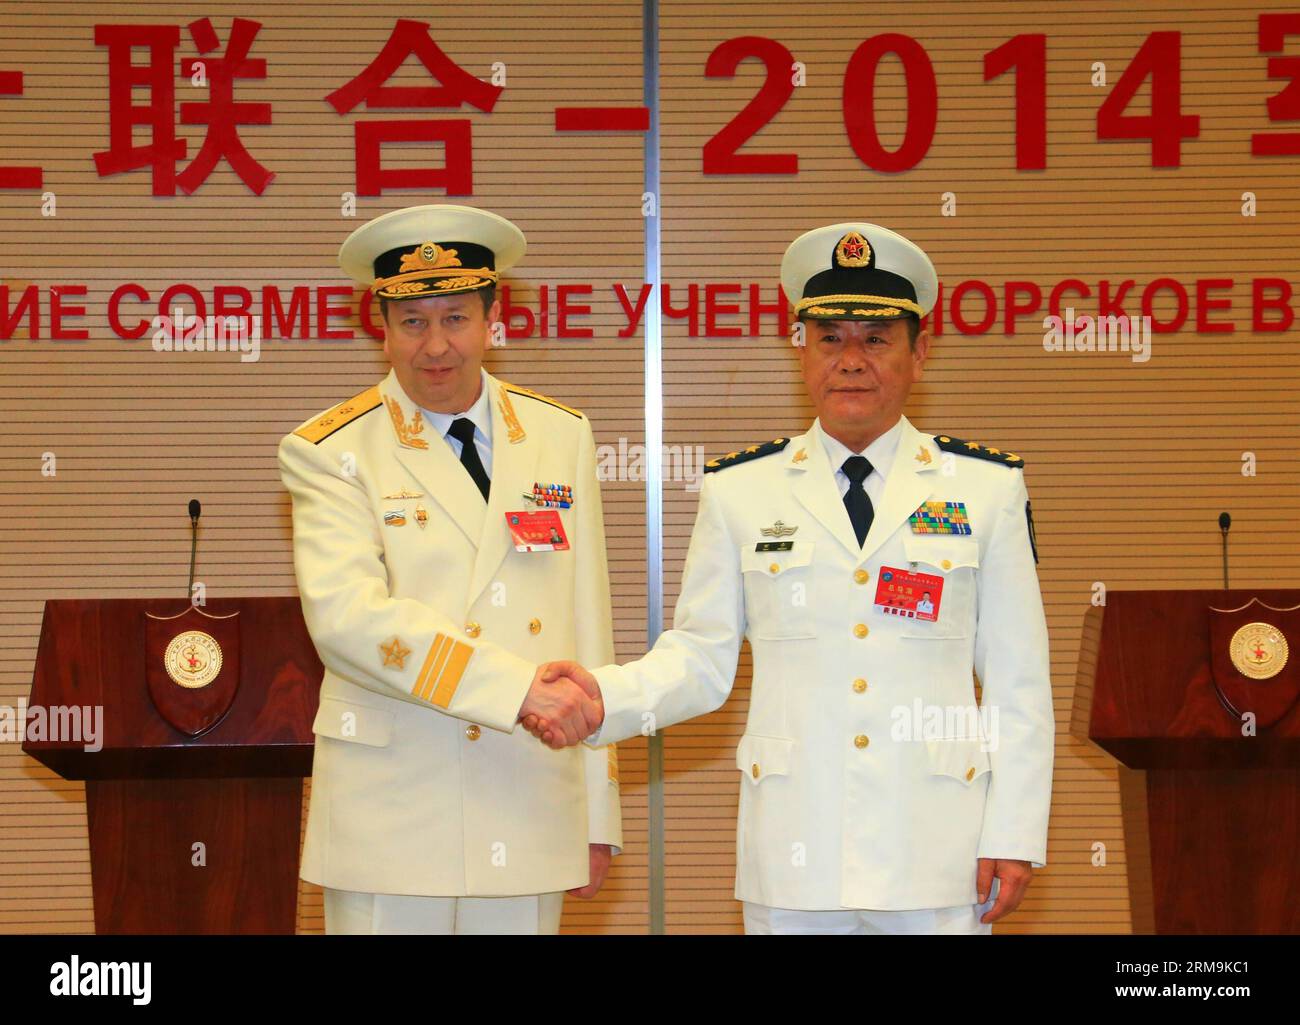 Tian Zhong (R), deputy commander of the Chinese Navy and the Chinese director of the Joint Sea-2014 , shakes hands with Fedotenkov, deputy commander of Russian Navy and Russian director of the drill, at the closing ceremony of the China-Russia joint naval drill in Shanghai, east China, May 26, 2014. The directors of two sides announced the end of the drill here on Monday. (Xinhua/Zha Chunming) (zkr) CHINA-SHANGHAI-RUSSIA-JOINT NAVAL DRILL-CLOSE(CN) PUBLICATIONxNOTxINxCHN   Tian Zhong r Deputy Commander of The Chinese Navy and The Chinese Director of The Joint Sea 2014 Shakes Hands With  Deputy Stock Photo